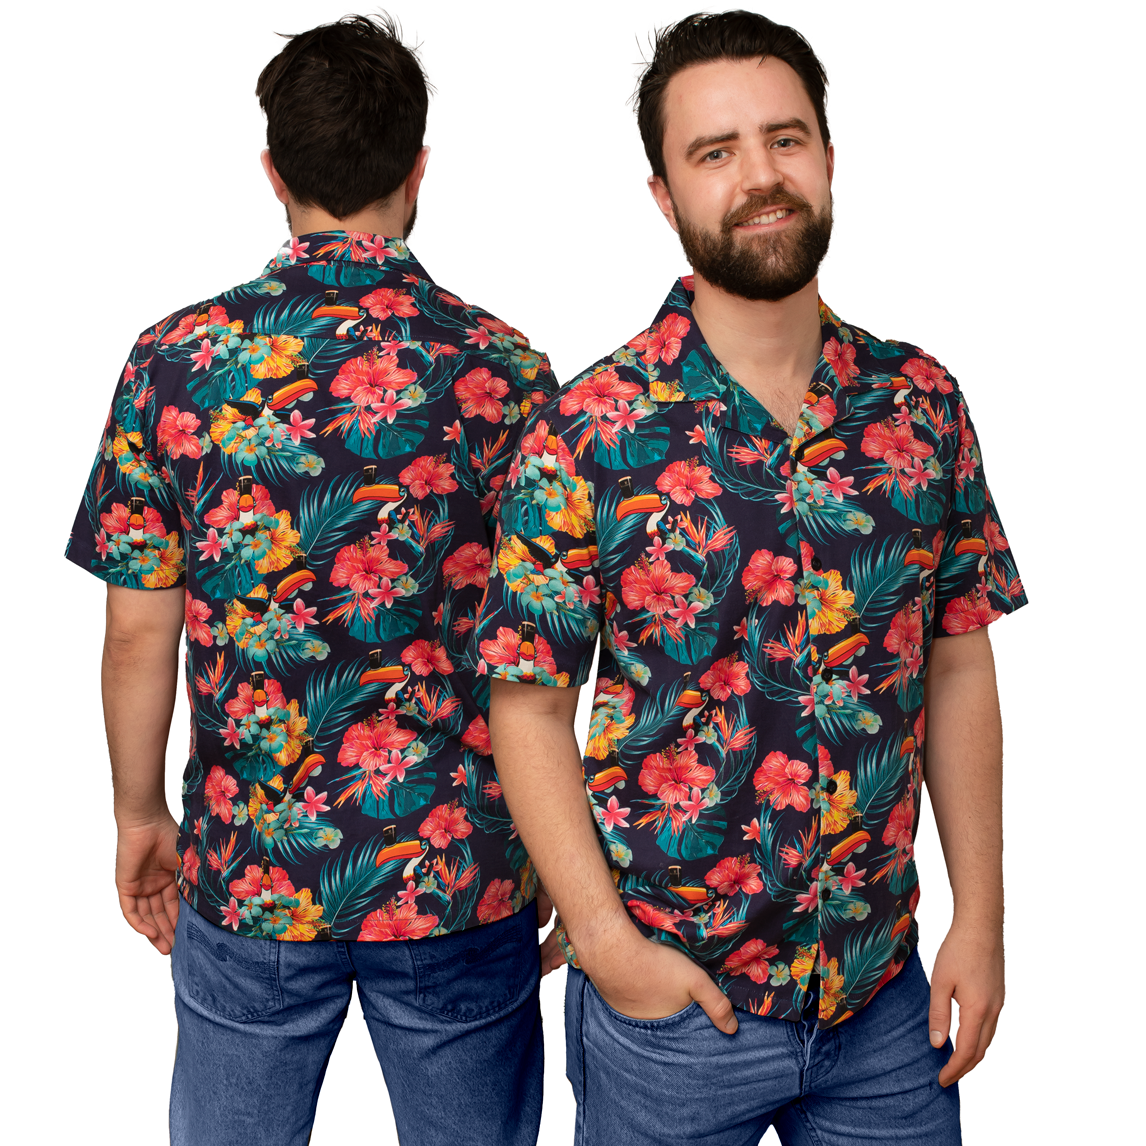 A man wearing a Guinness Toucan Hawaiian shirt with tropical plants and flowers.